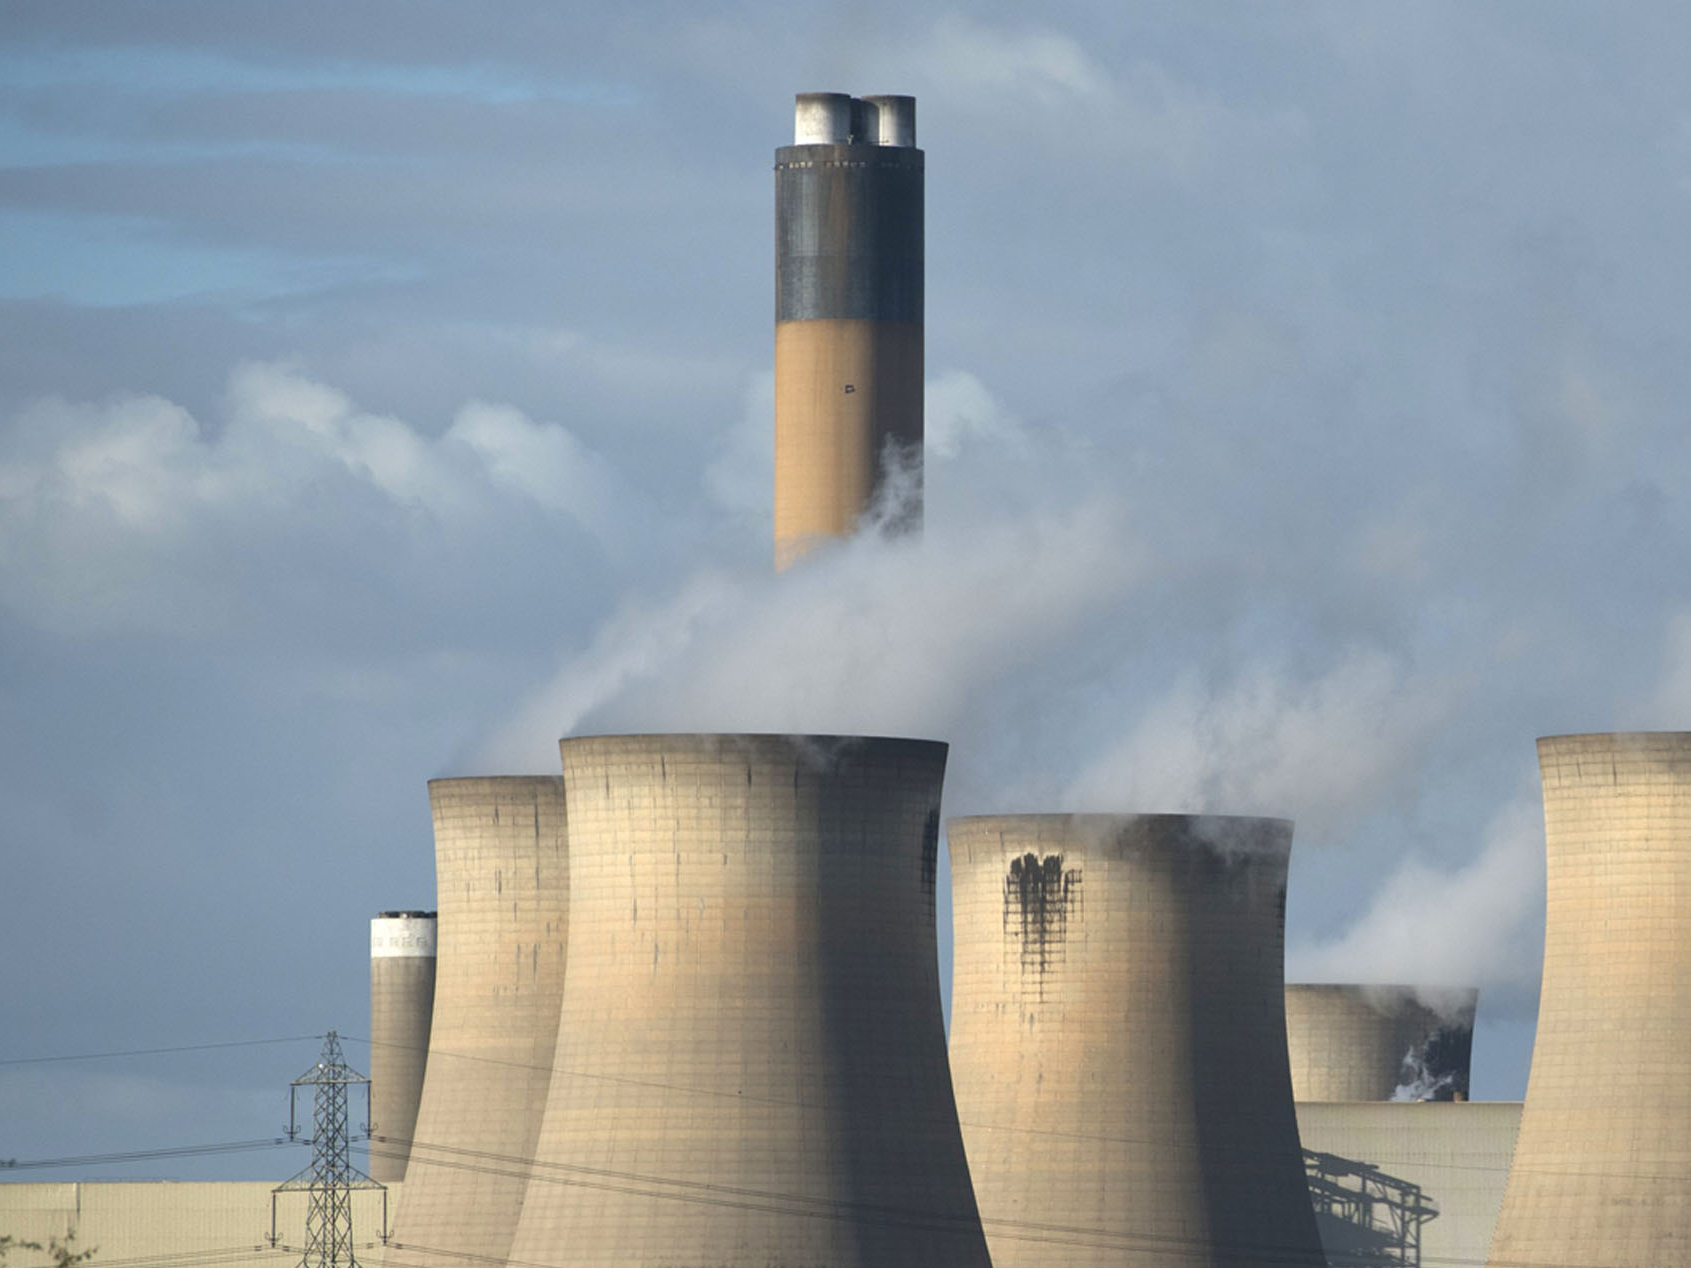 A view of the cooling towers of the Drax coal-fired power station near Selby, northern England on September 25, 2015.